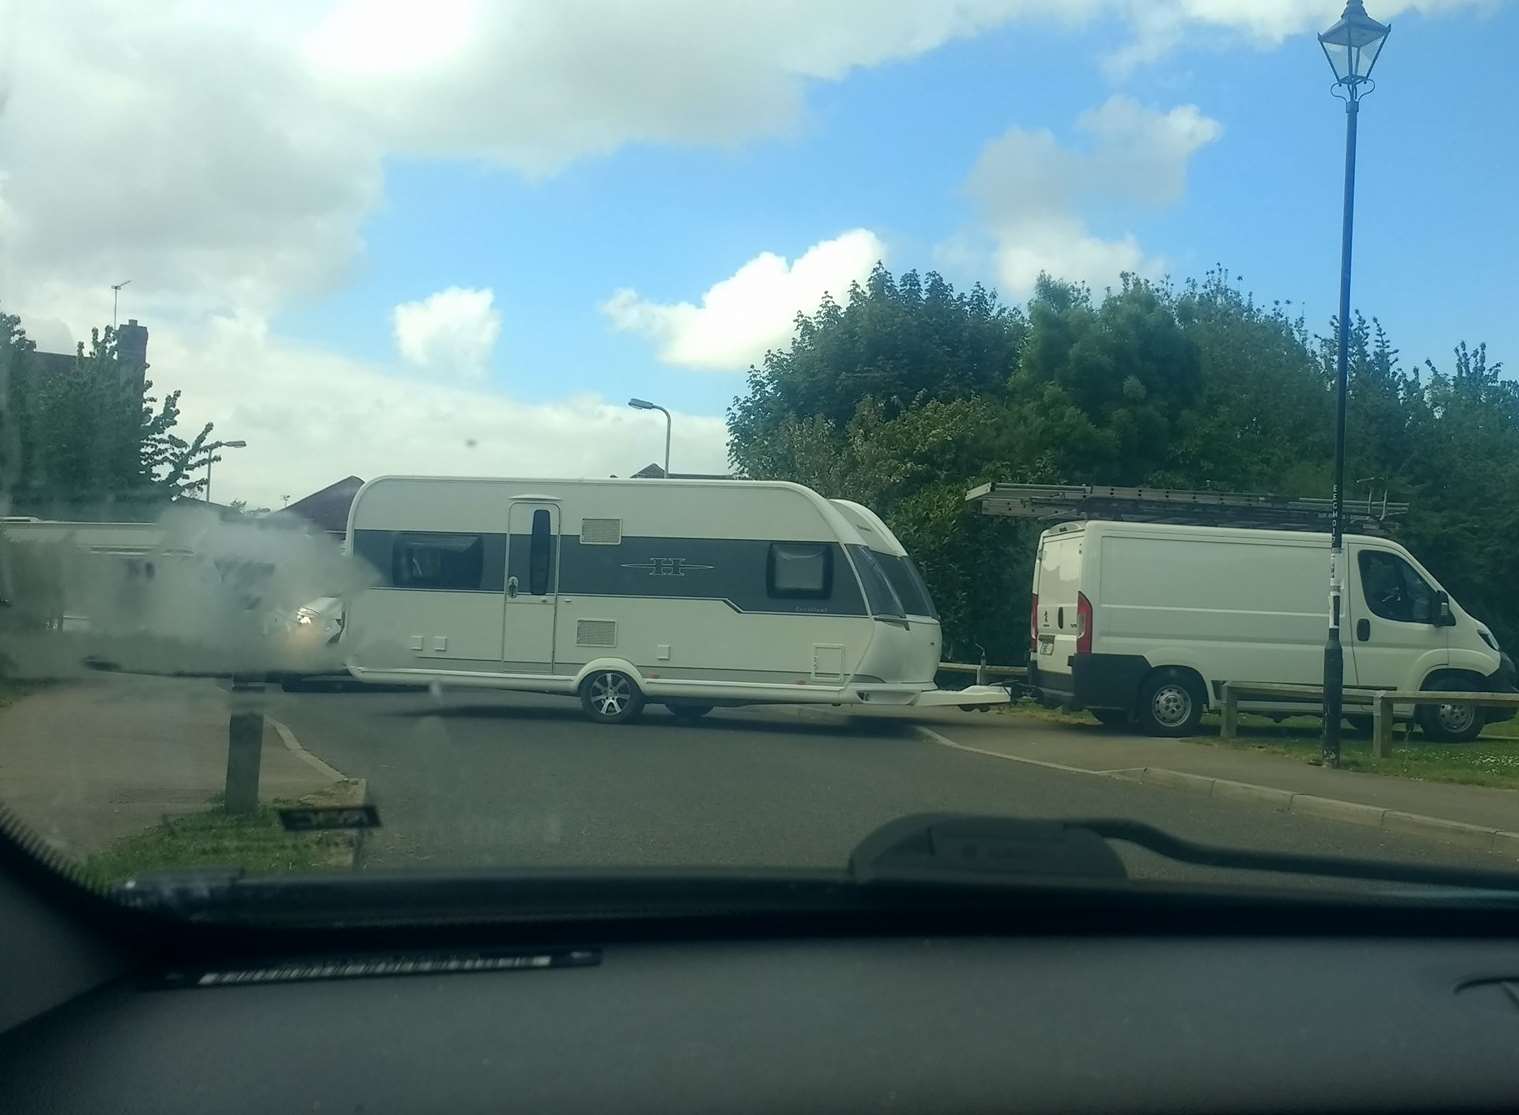 The caravans arrived this afternoon